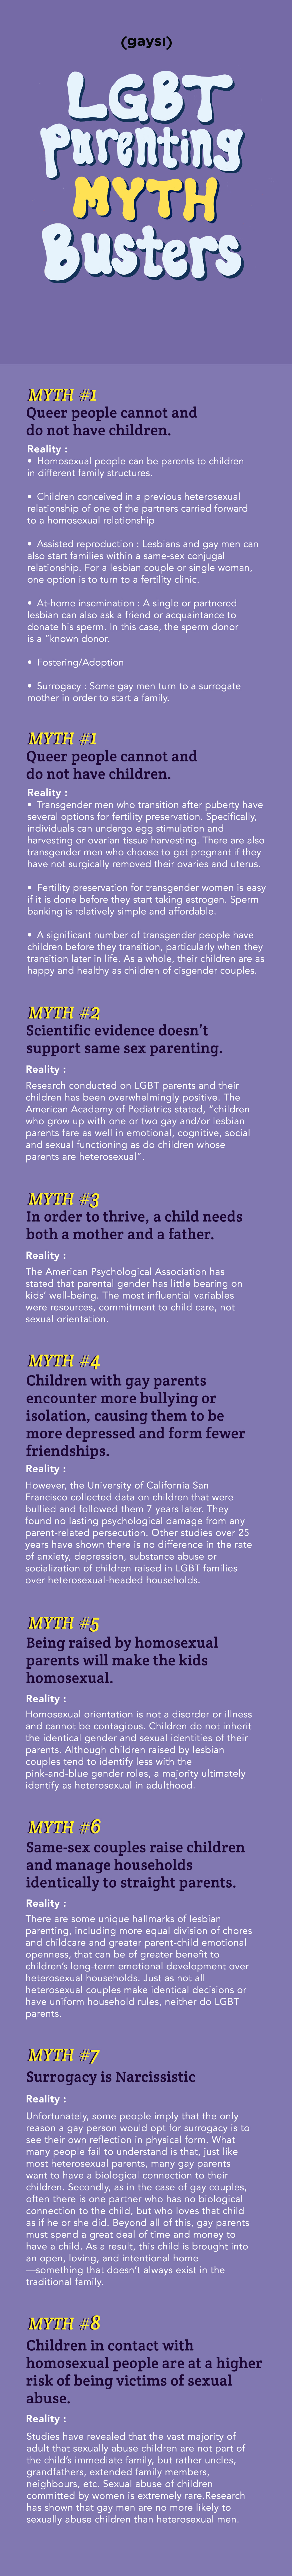 8 LGBT Parenting Myth Busters